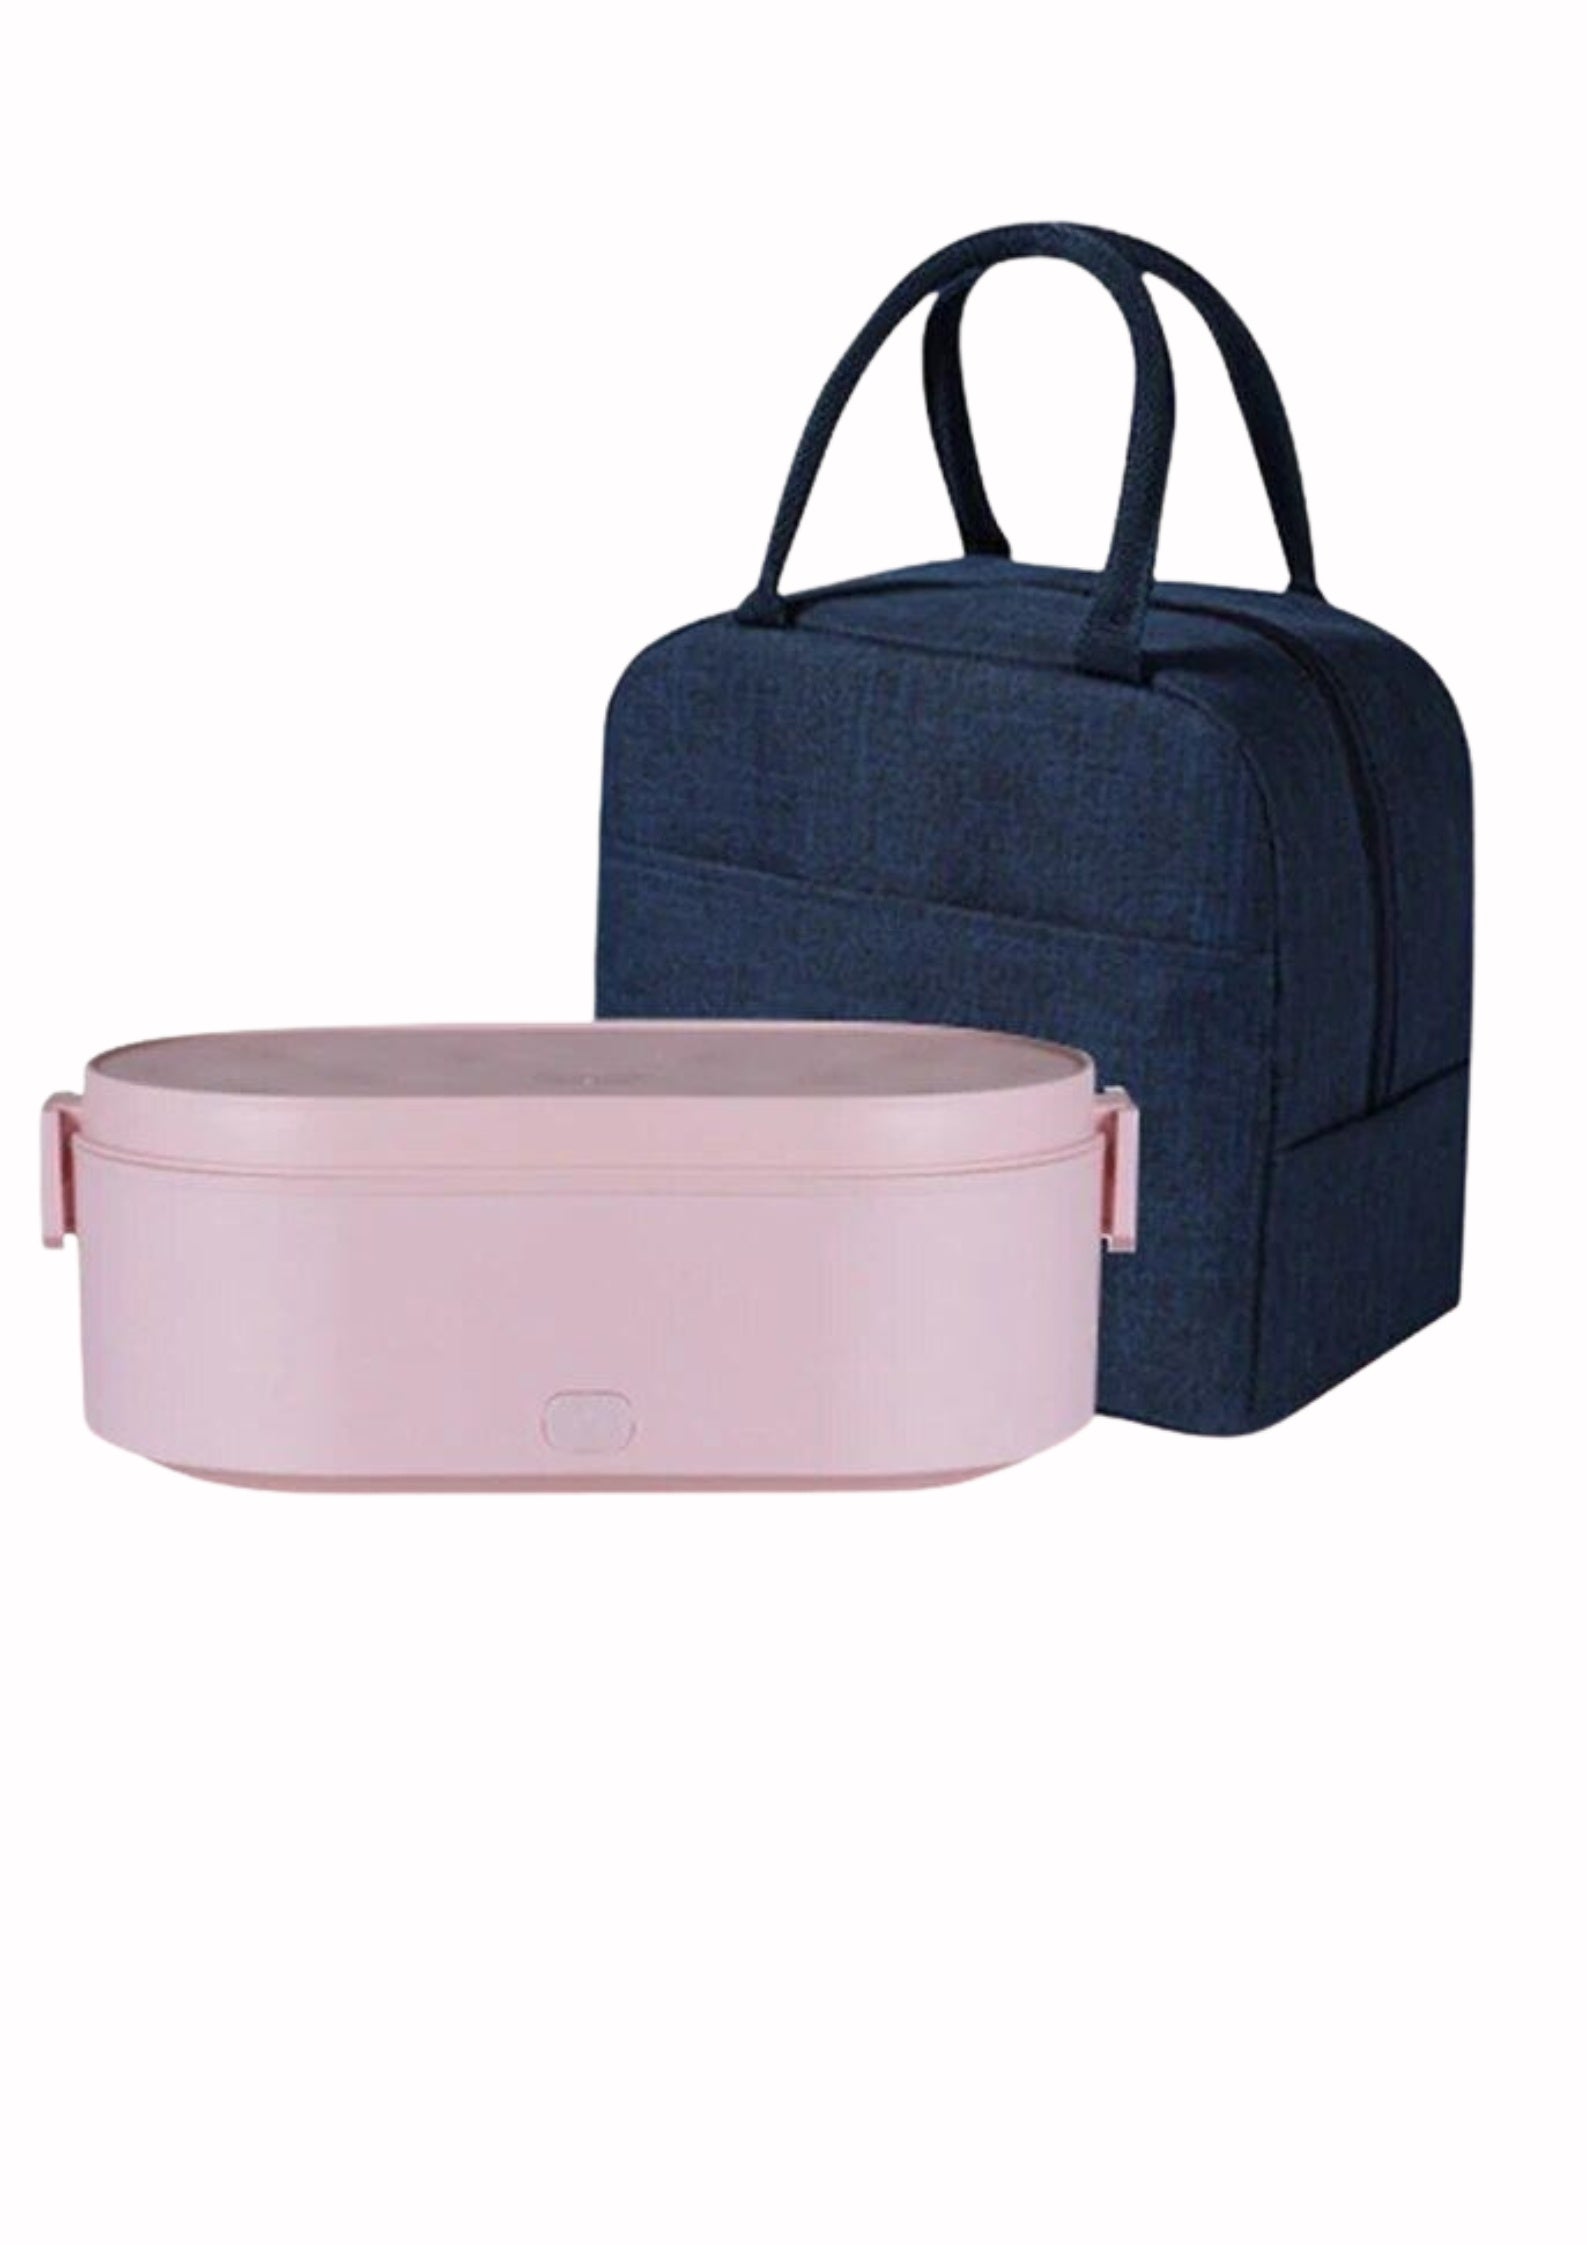 Electric Lunch Heather Box Pink with blue bag